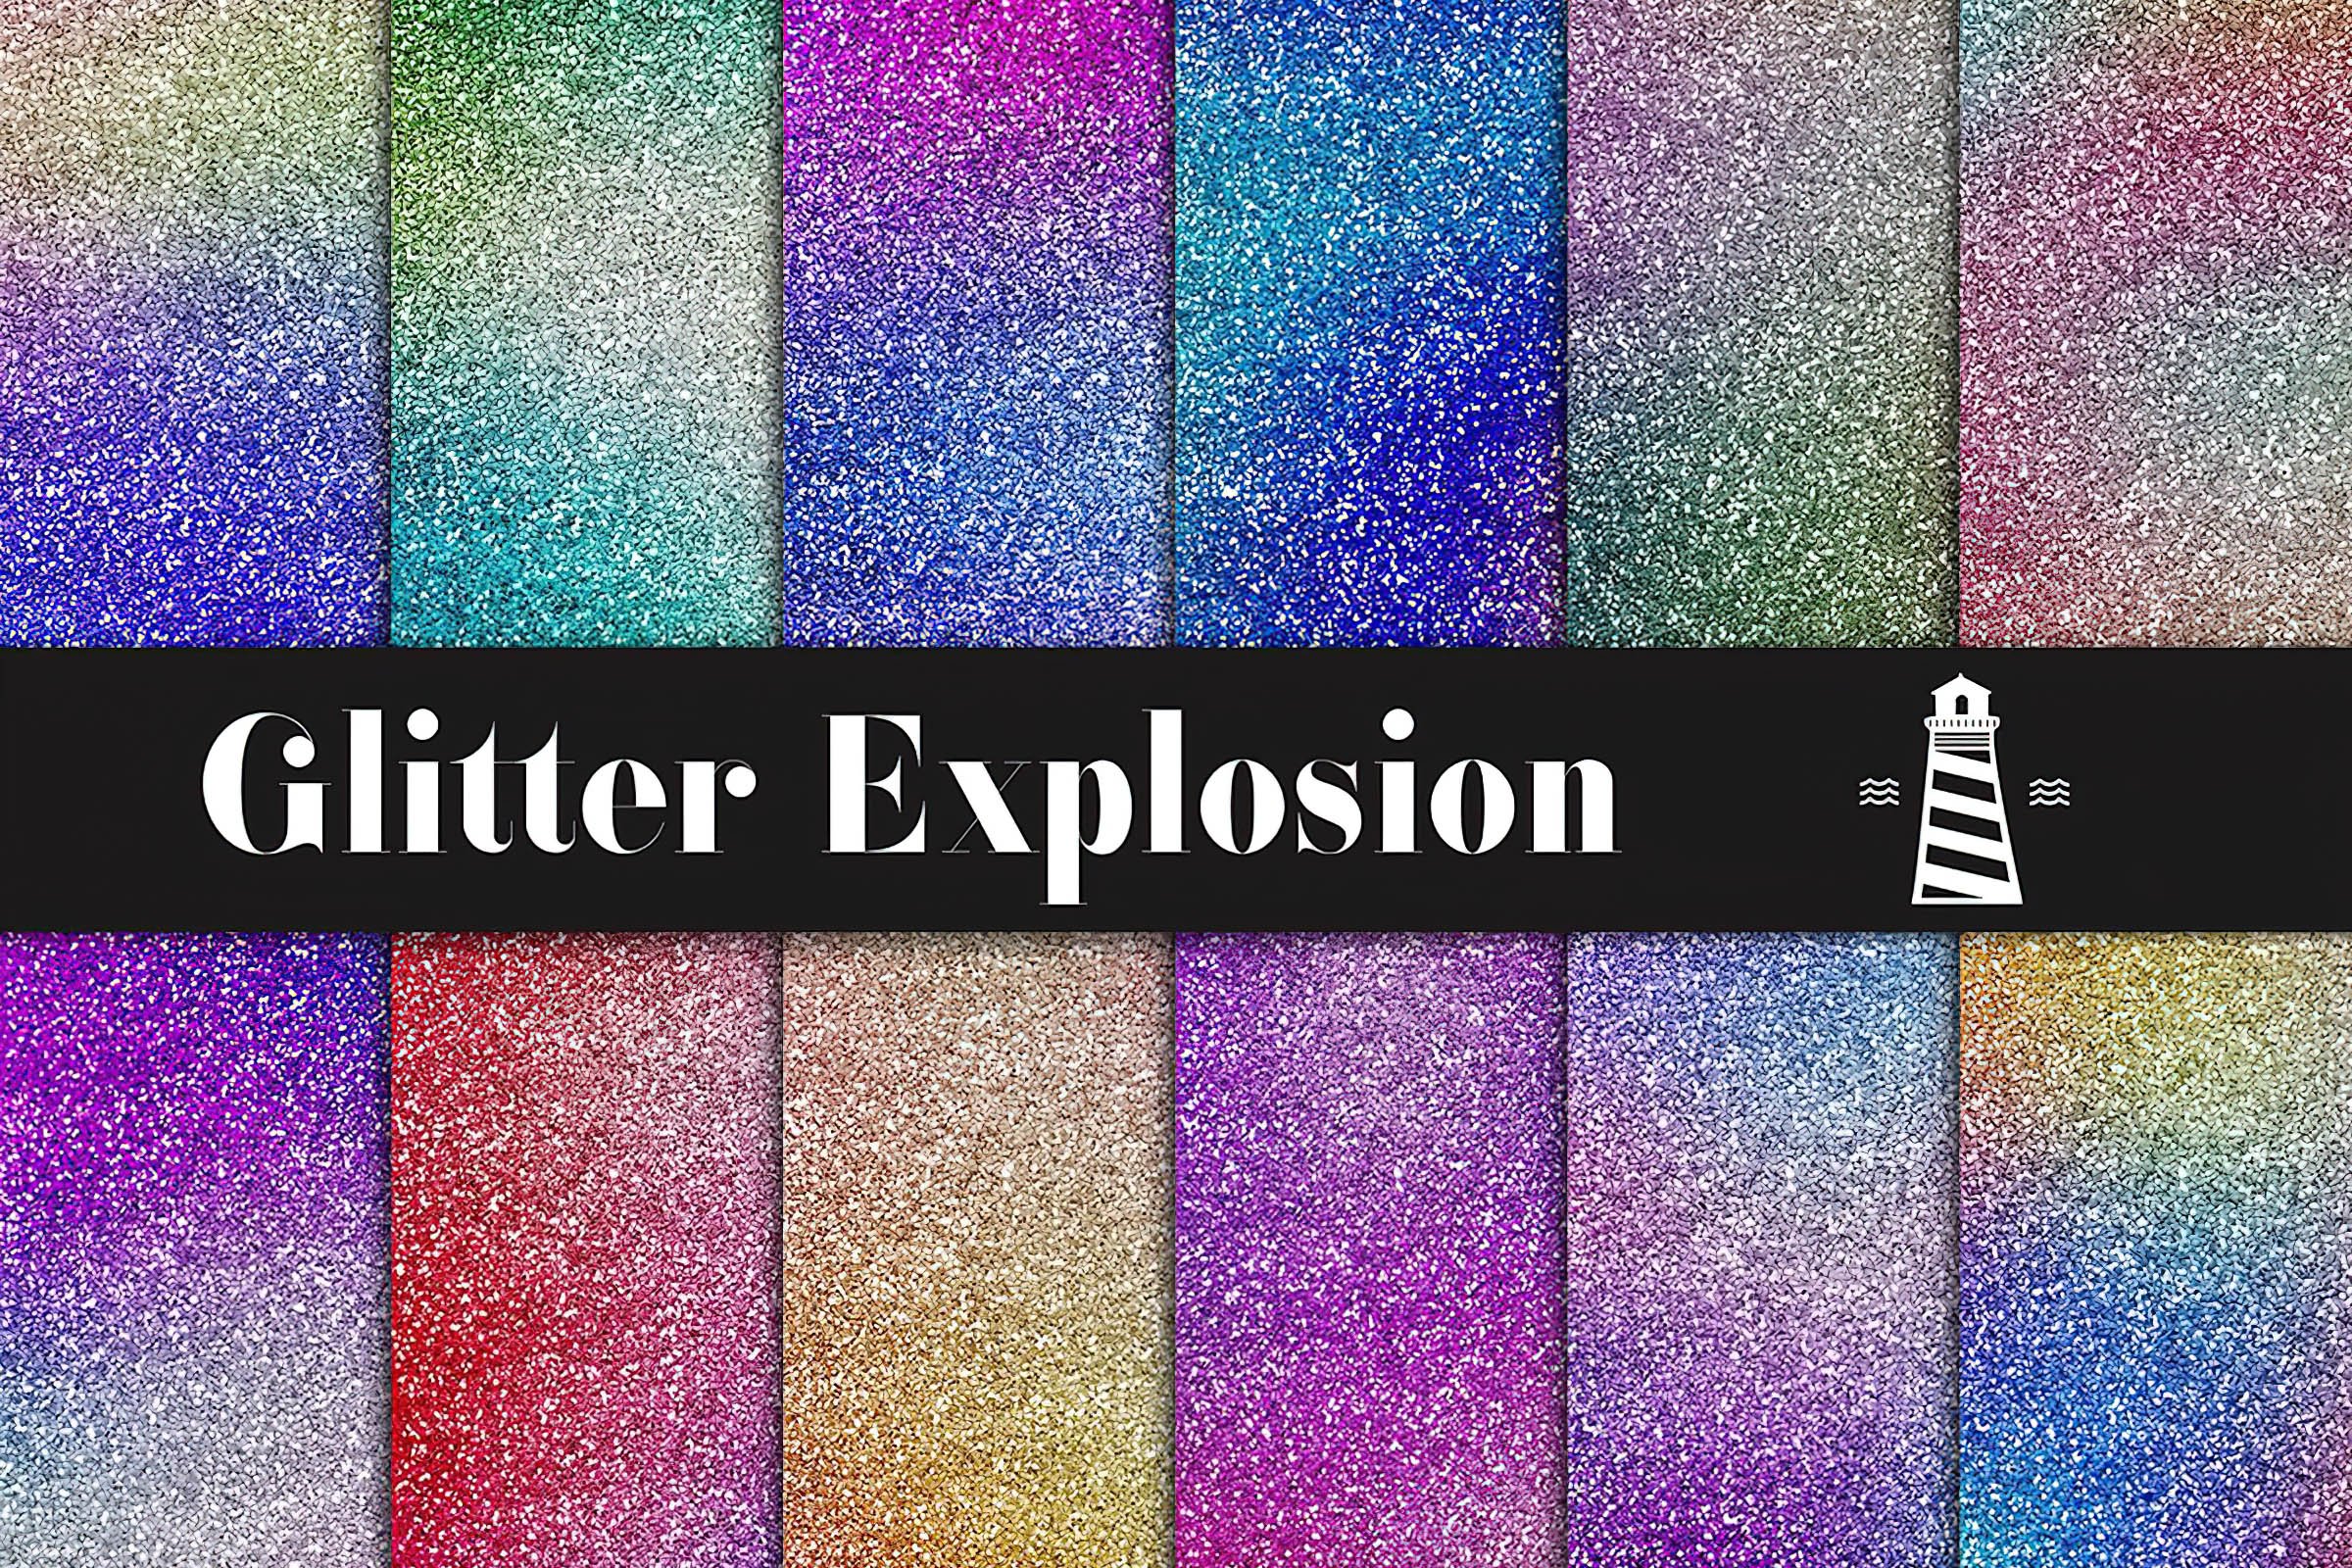 Glitter Explosion Textures cover image.